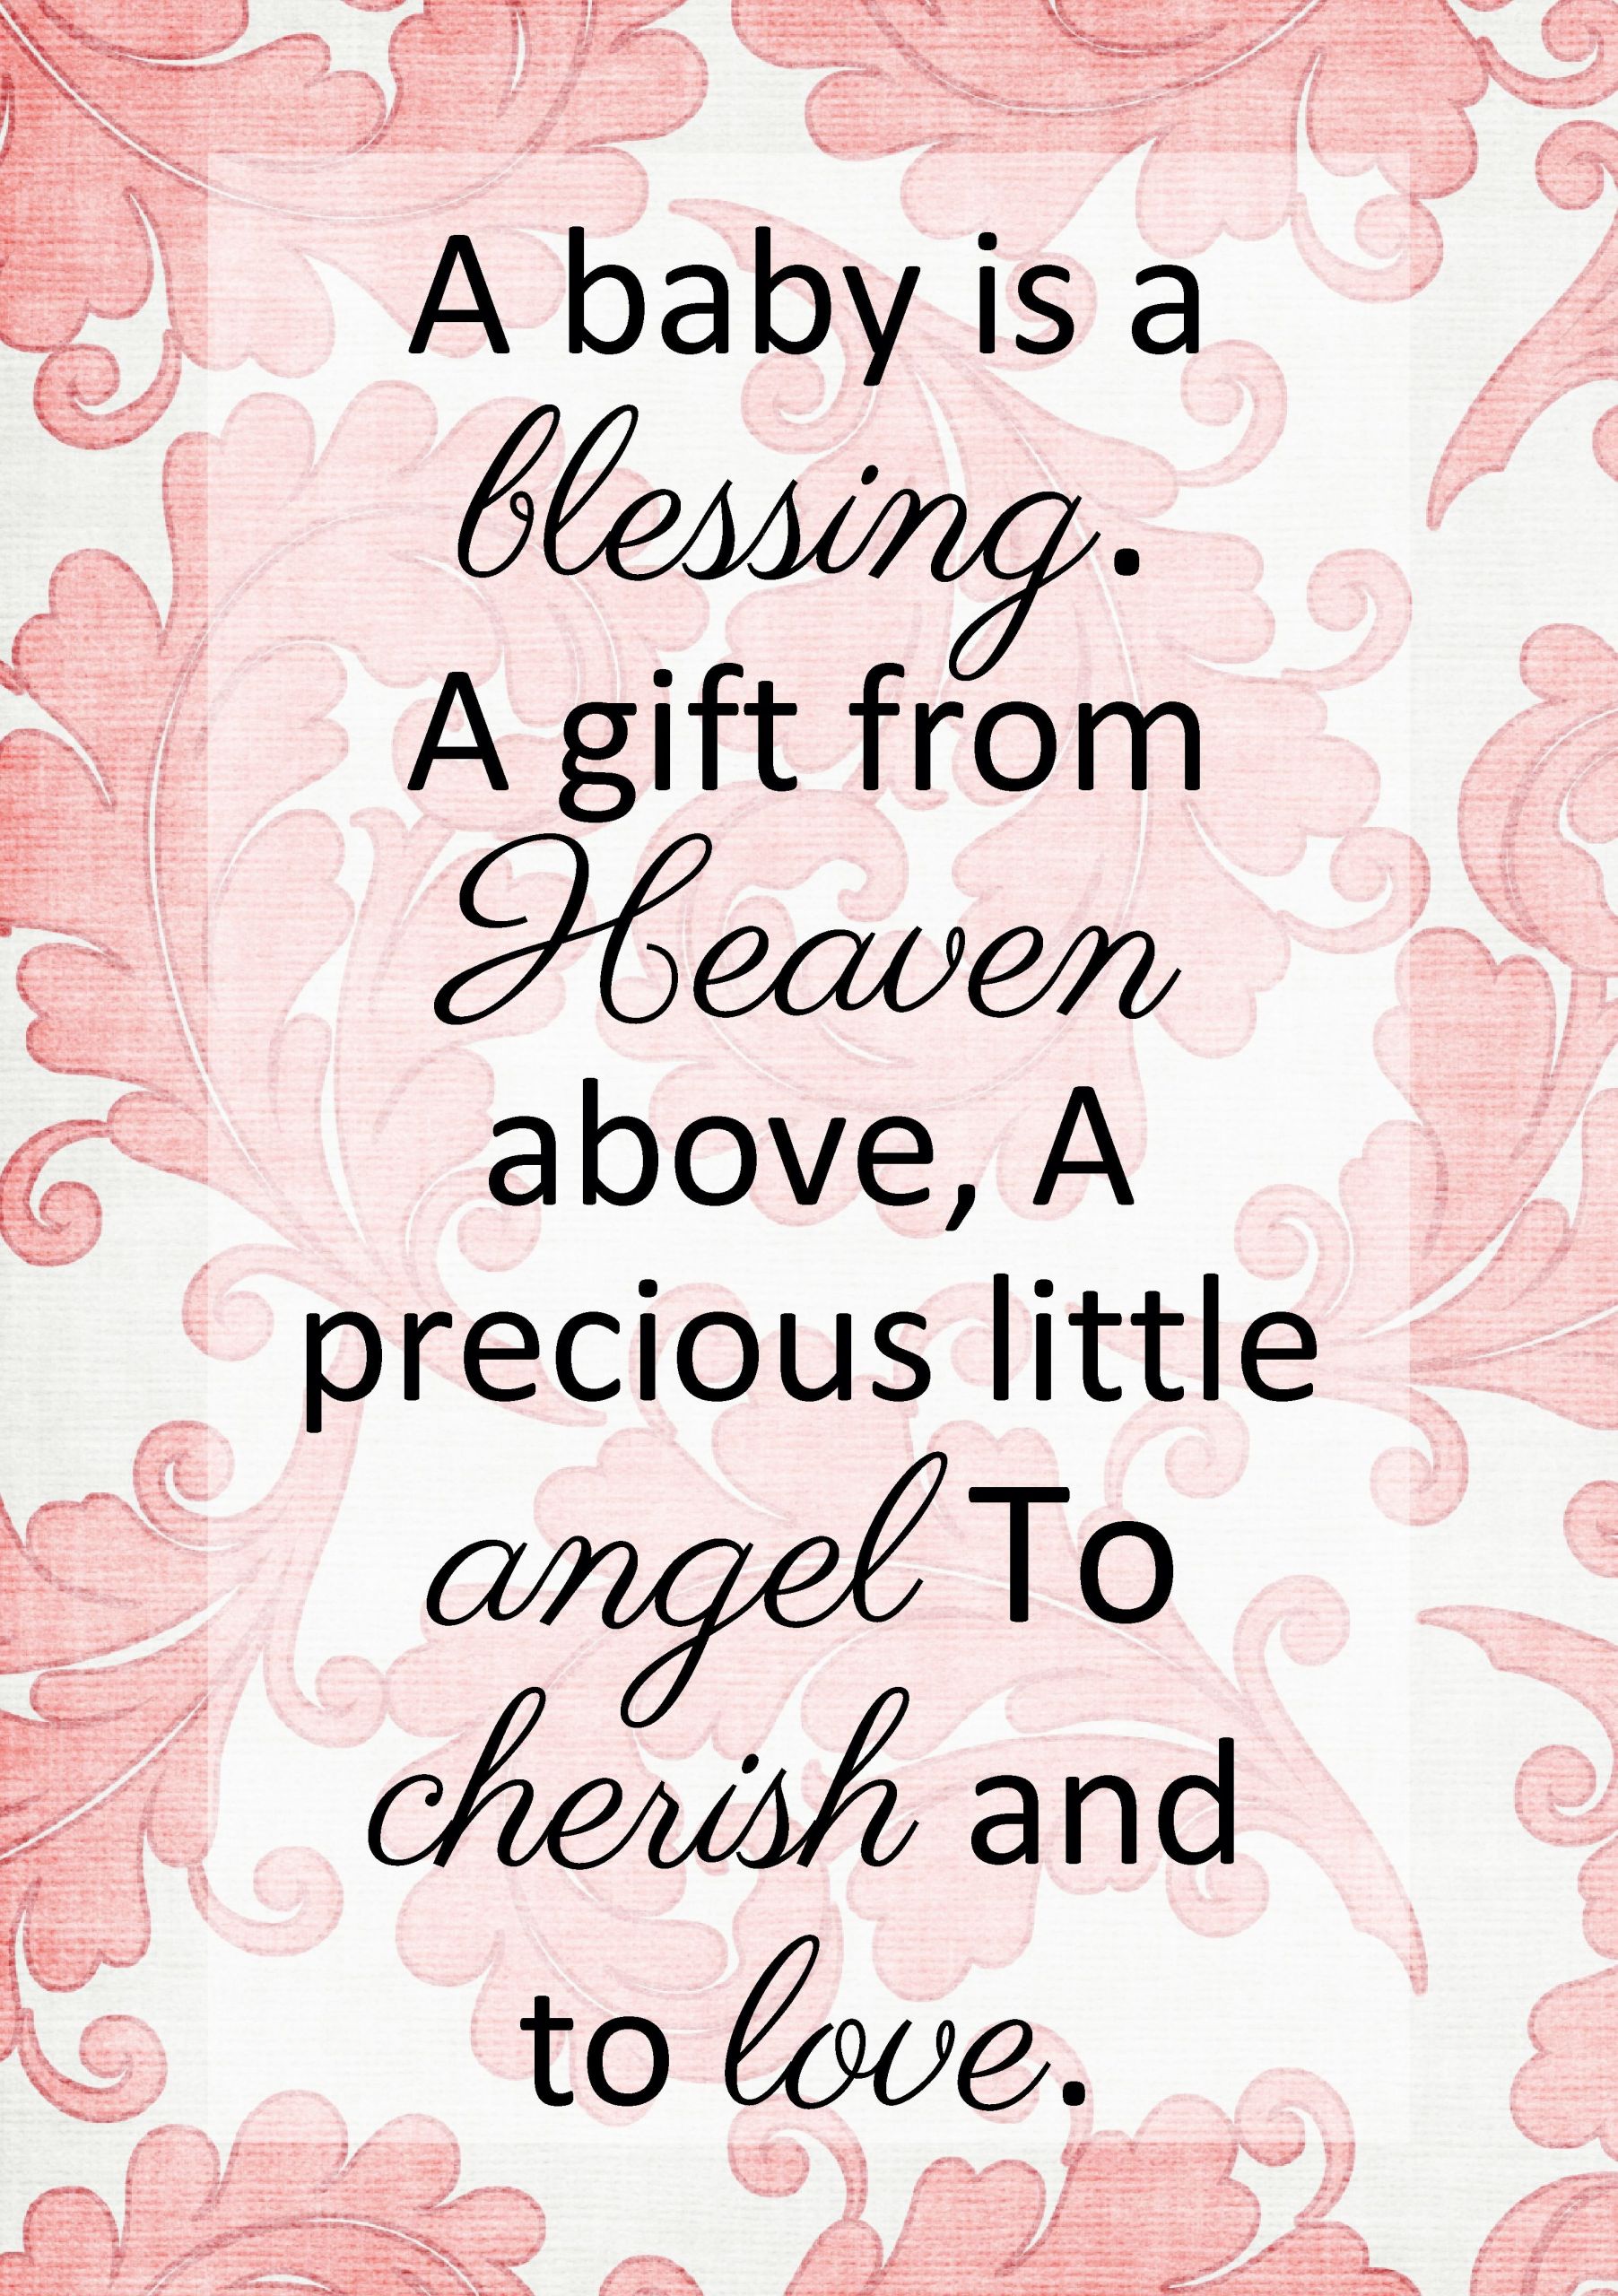 New Baby Blessing Quotes
 A Baby is a Blessing a t from Heaven above A precious